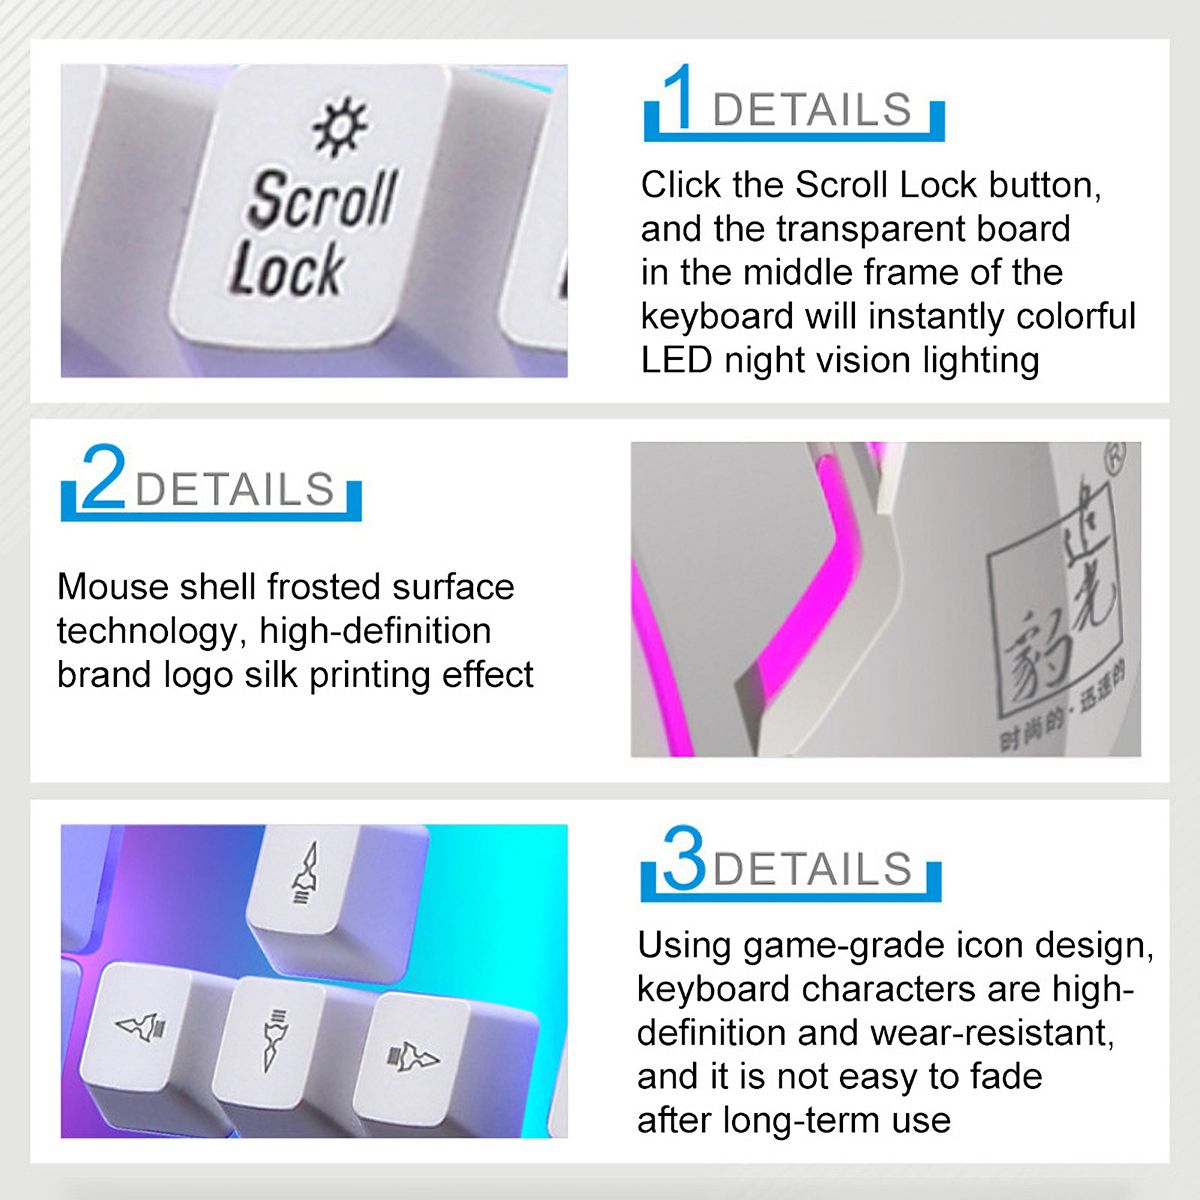 G21B-104-Keys-USB-Wired-Gaming-Keyboard-Mouse-Set-Rainbow-LED-Rainbow-Color-Backlight-for-PC-Laptop--1739319